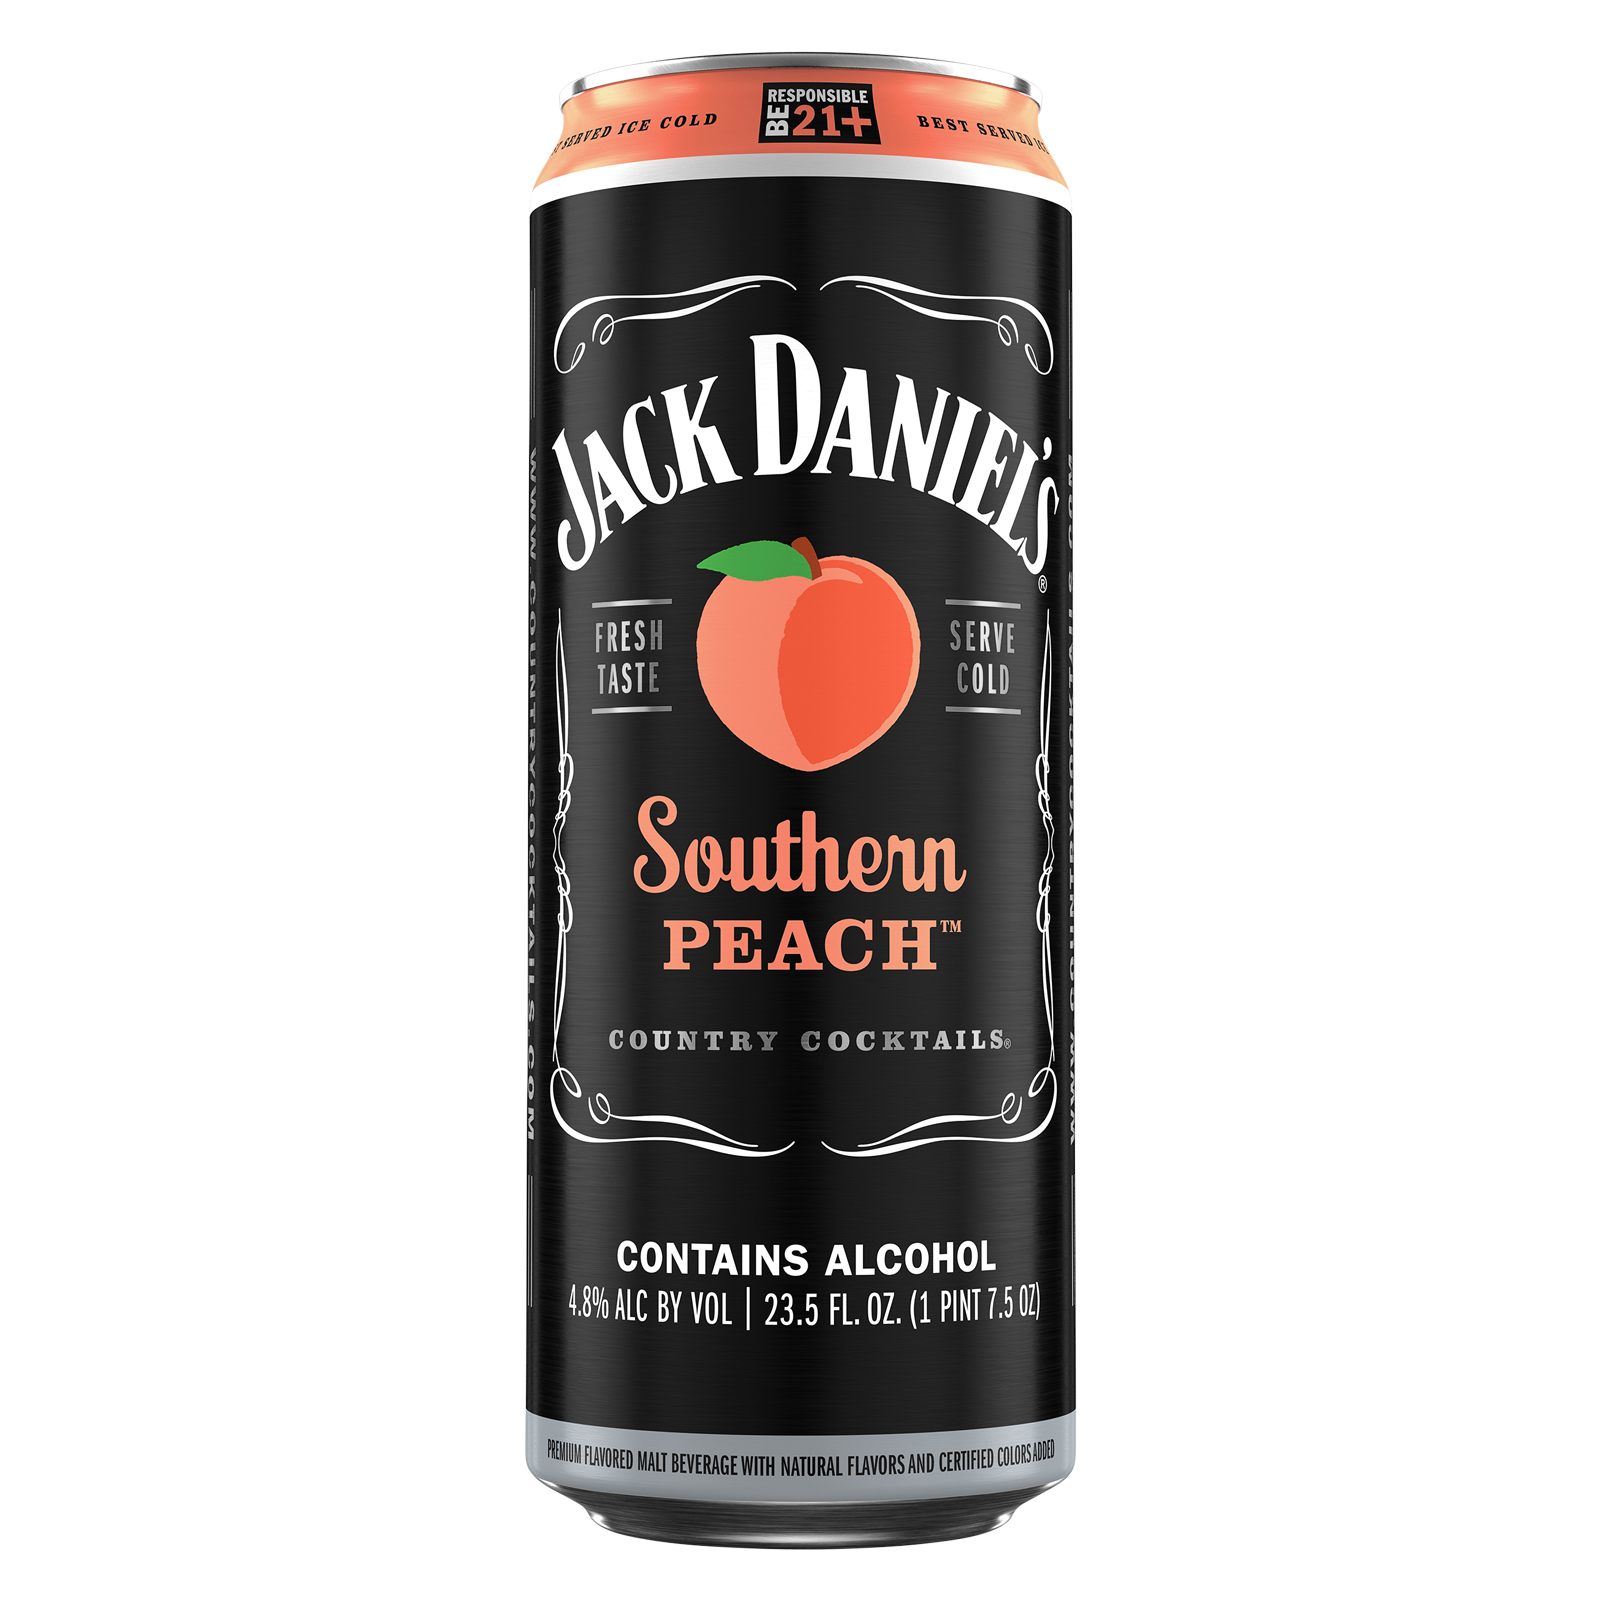 Jack Daniel's Country Cocktails Southern Peach Single 23.5oz Can 4.8% ABV